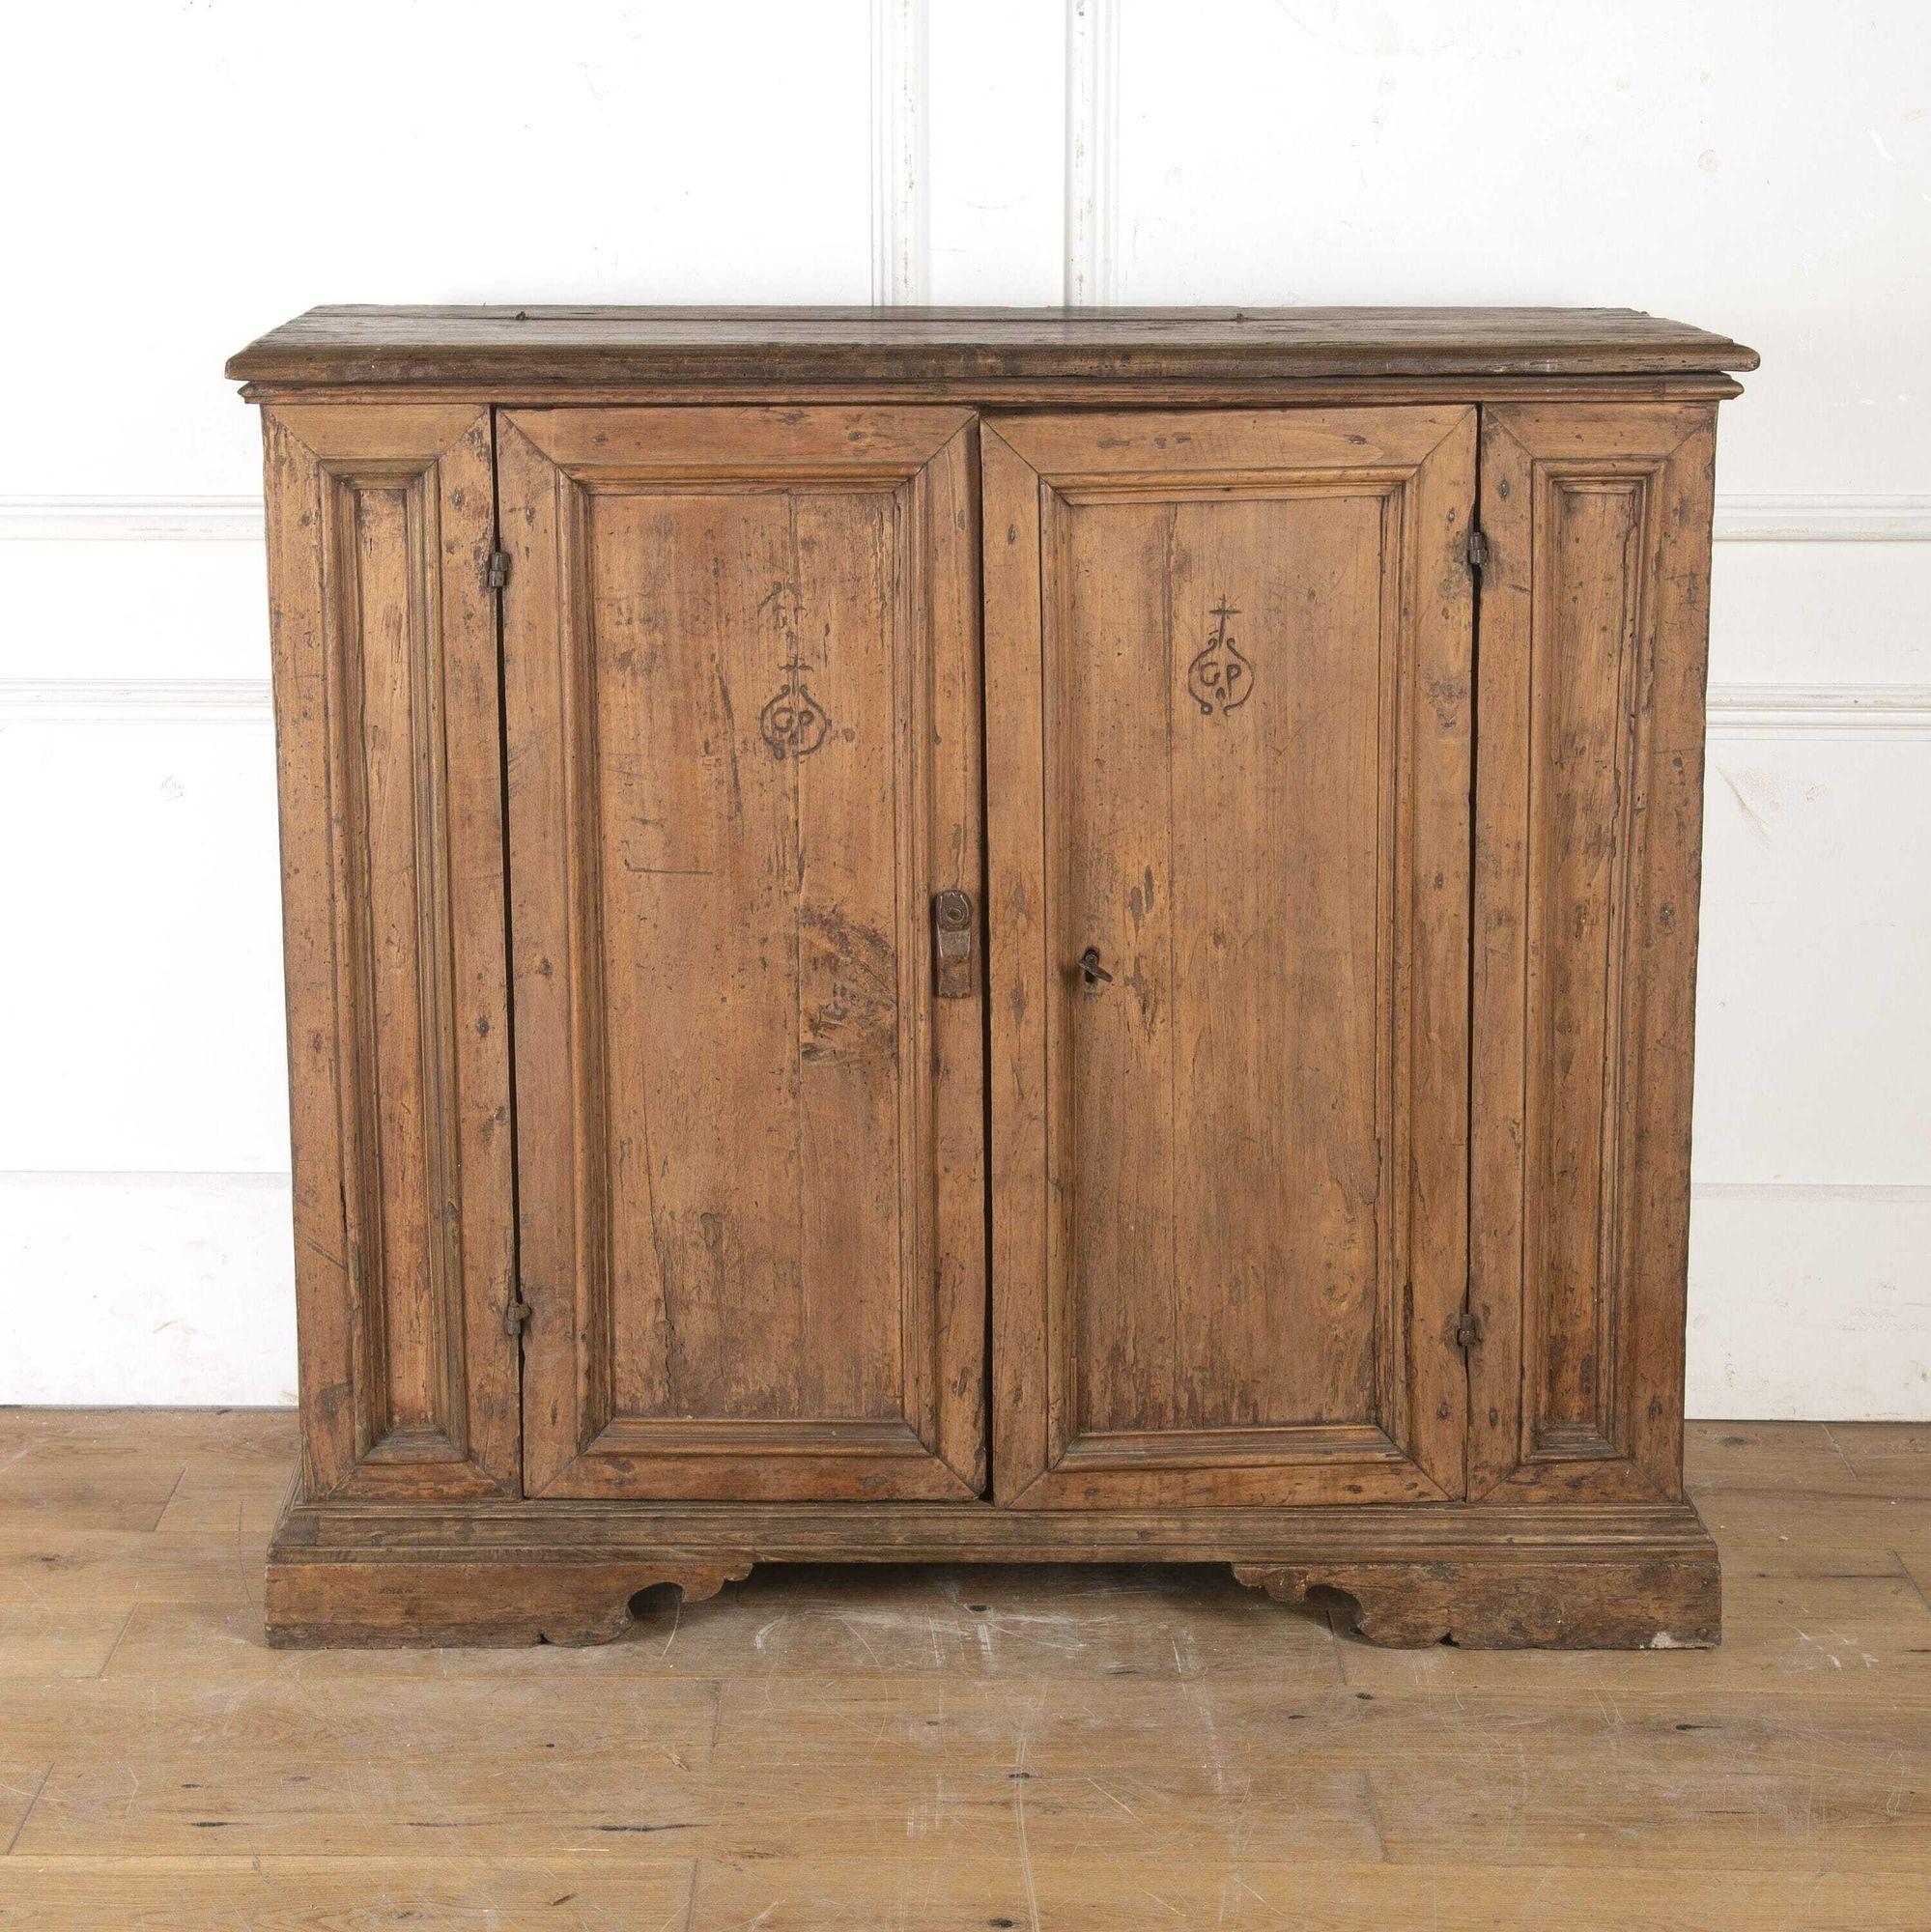 Wonderful 18th Century cupboard from a Tuscan convent. 
This fascinating fruitwood cupboard has low proportions with two central doors flanked by panelled sections. The doors each bear a hand-carved crucifix and the letters G.P. 
Inside are two